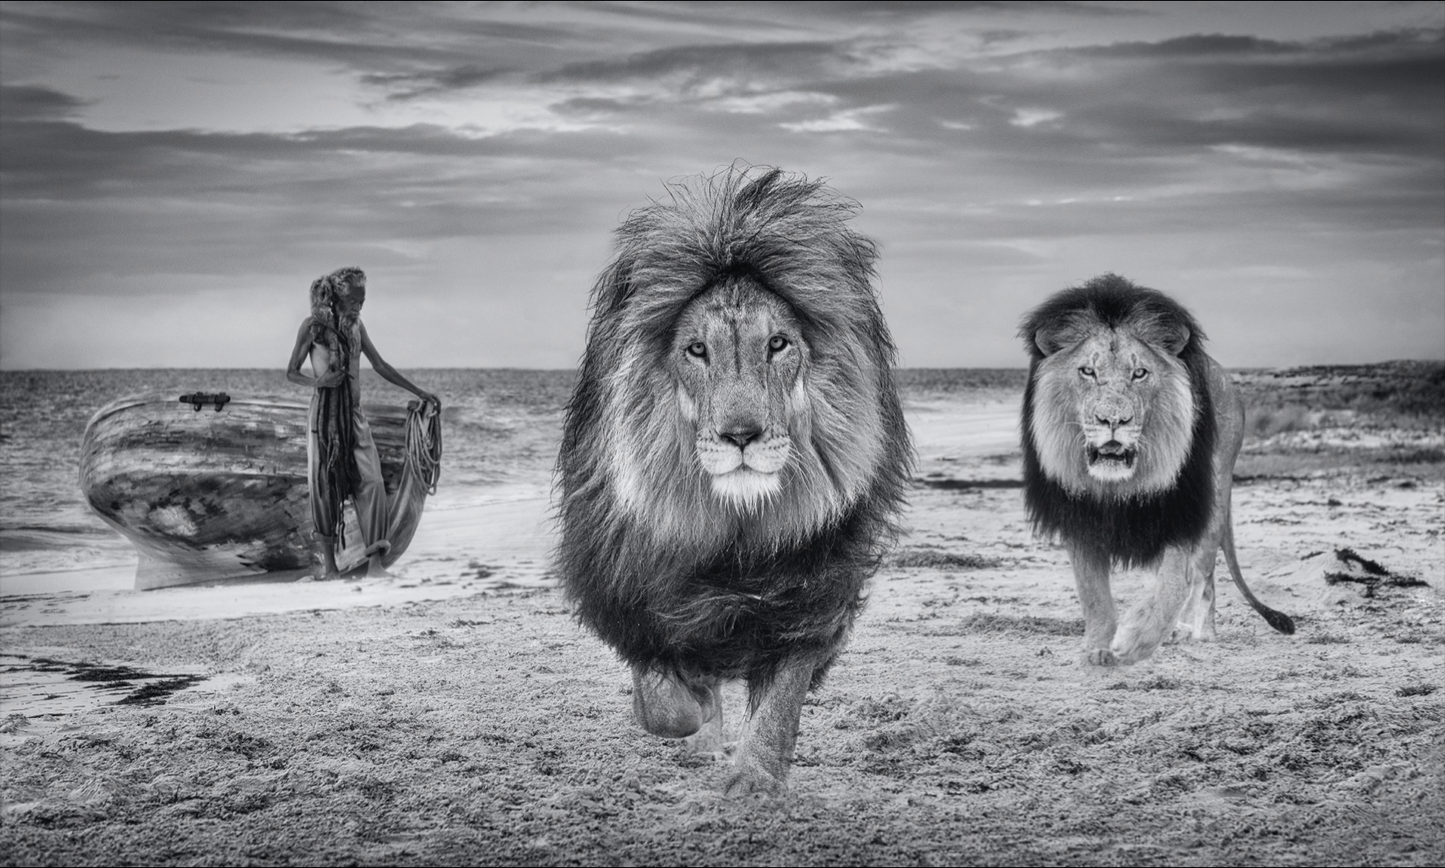 The Old Man and the Sea-Photographic Print-David Yarrow-Sorrel Sky Gallery